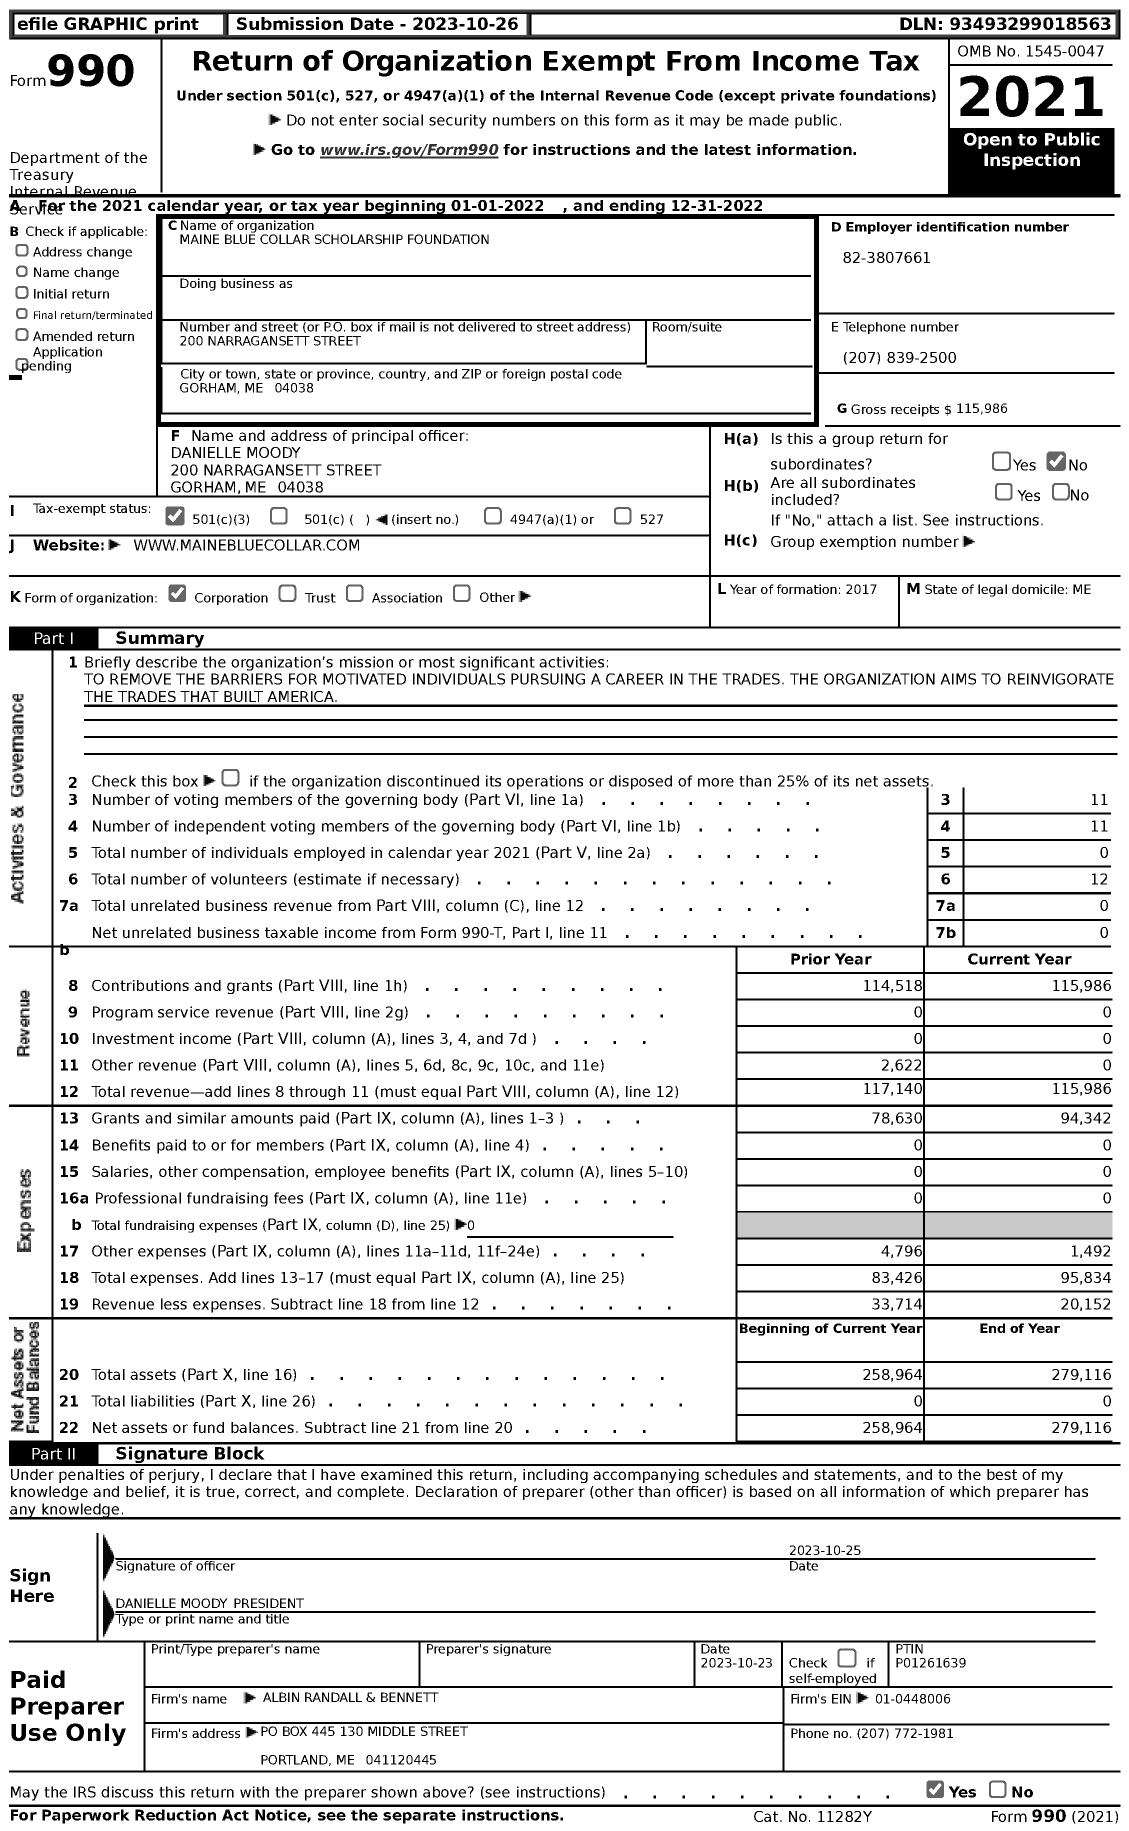 Image of first page of 2022 Form 990 for Maine Blue Collar Scholarship Foundation